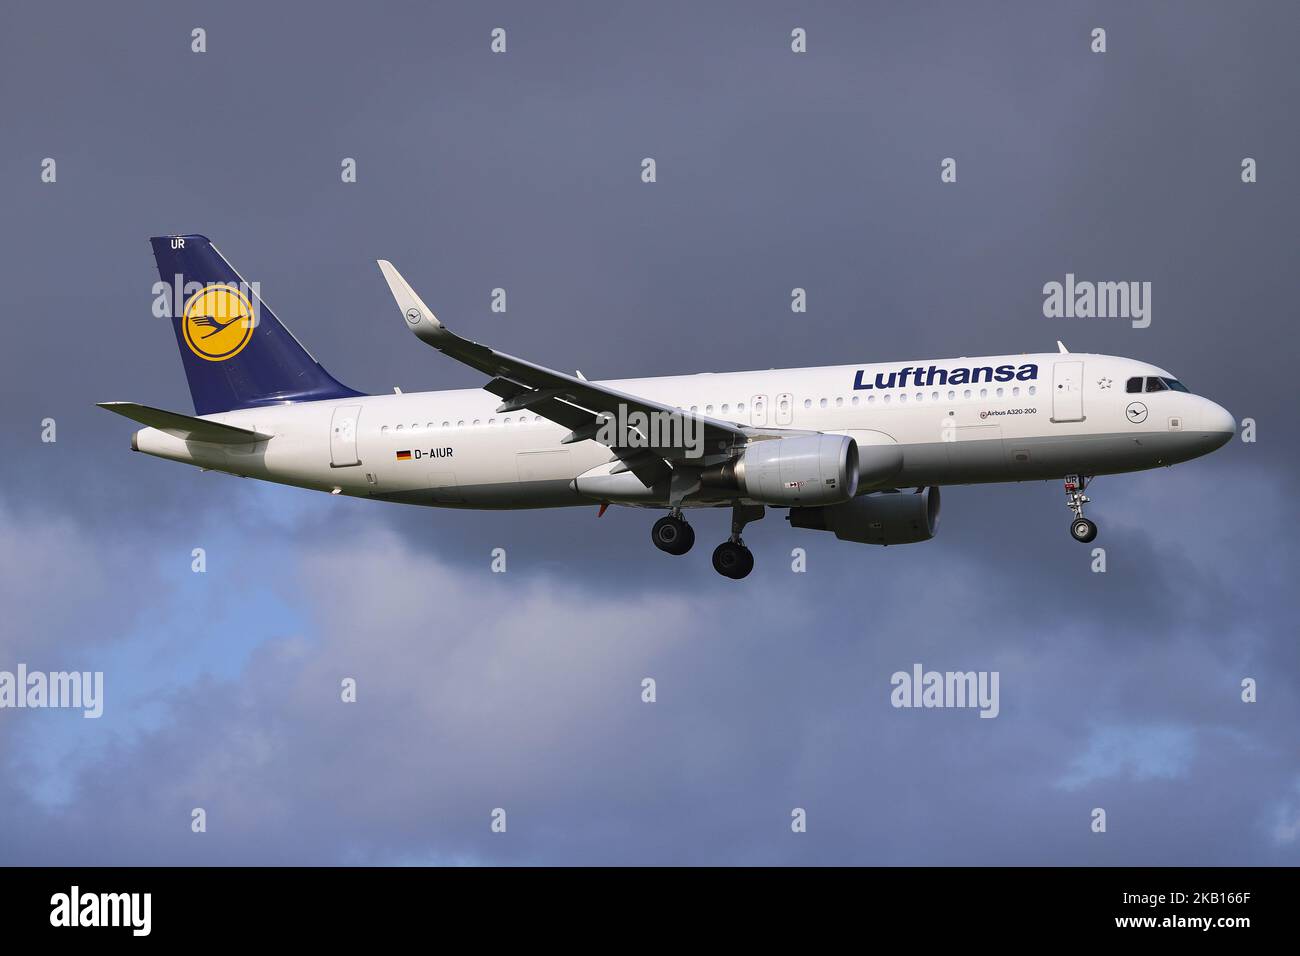 An Airbus A320-200 from Lufthansa is landing at Amsterdam Schiphol Airport in the Netherlands. The aircraft is an Airbus A320-200 produced in 2016 with registration D-AIUR. It carries 180 passengers in economy class. The airplane is equipped with 2 CFM56-5 engines and has sharklets. Lufthansa, officially as Deutsche Lufthansa is the largest airline in Germany and Europe, flying a fleet of 283 airplanes. Lufthansa is a member of Star Alliance. The airplane has the old livery. (Photo by Nicolas Economou/NurPhoto) Stock Photo